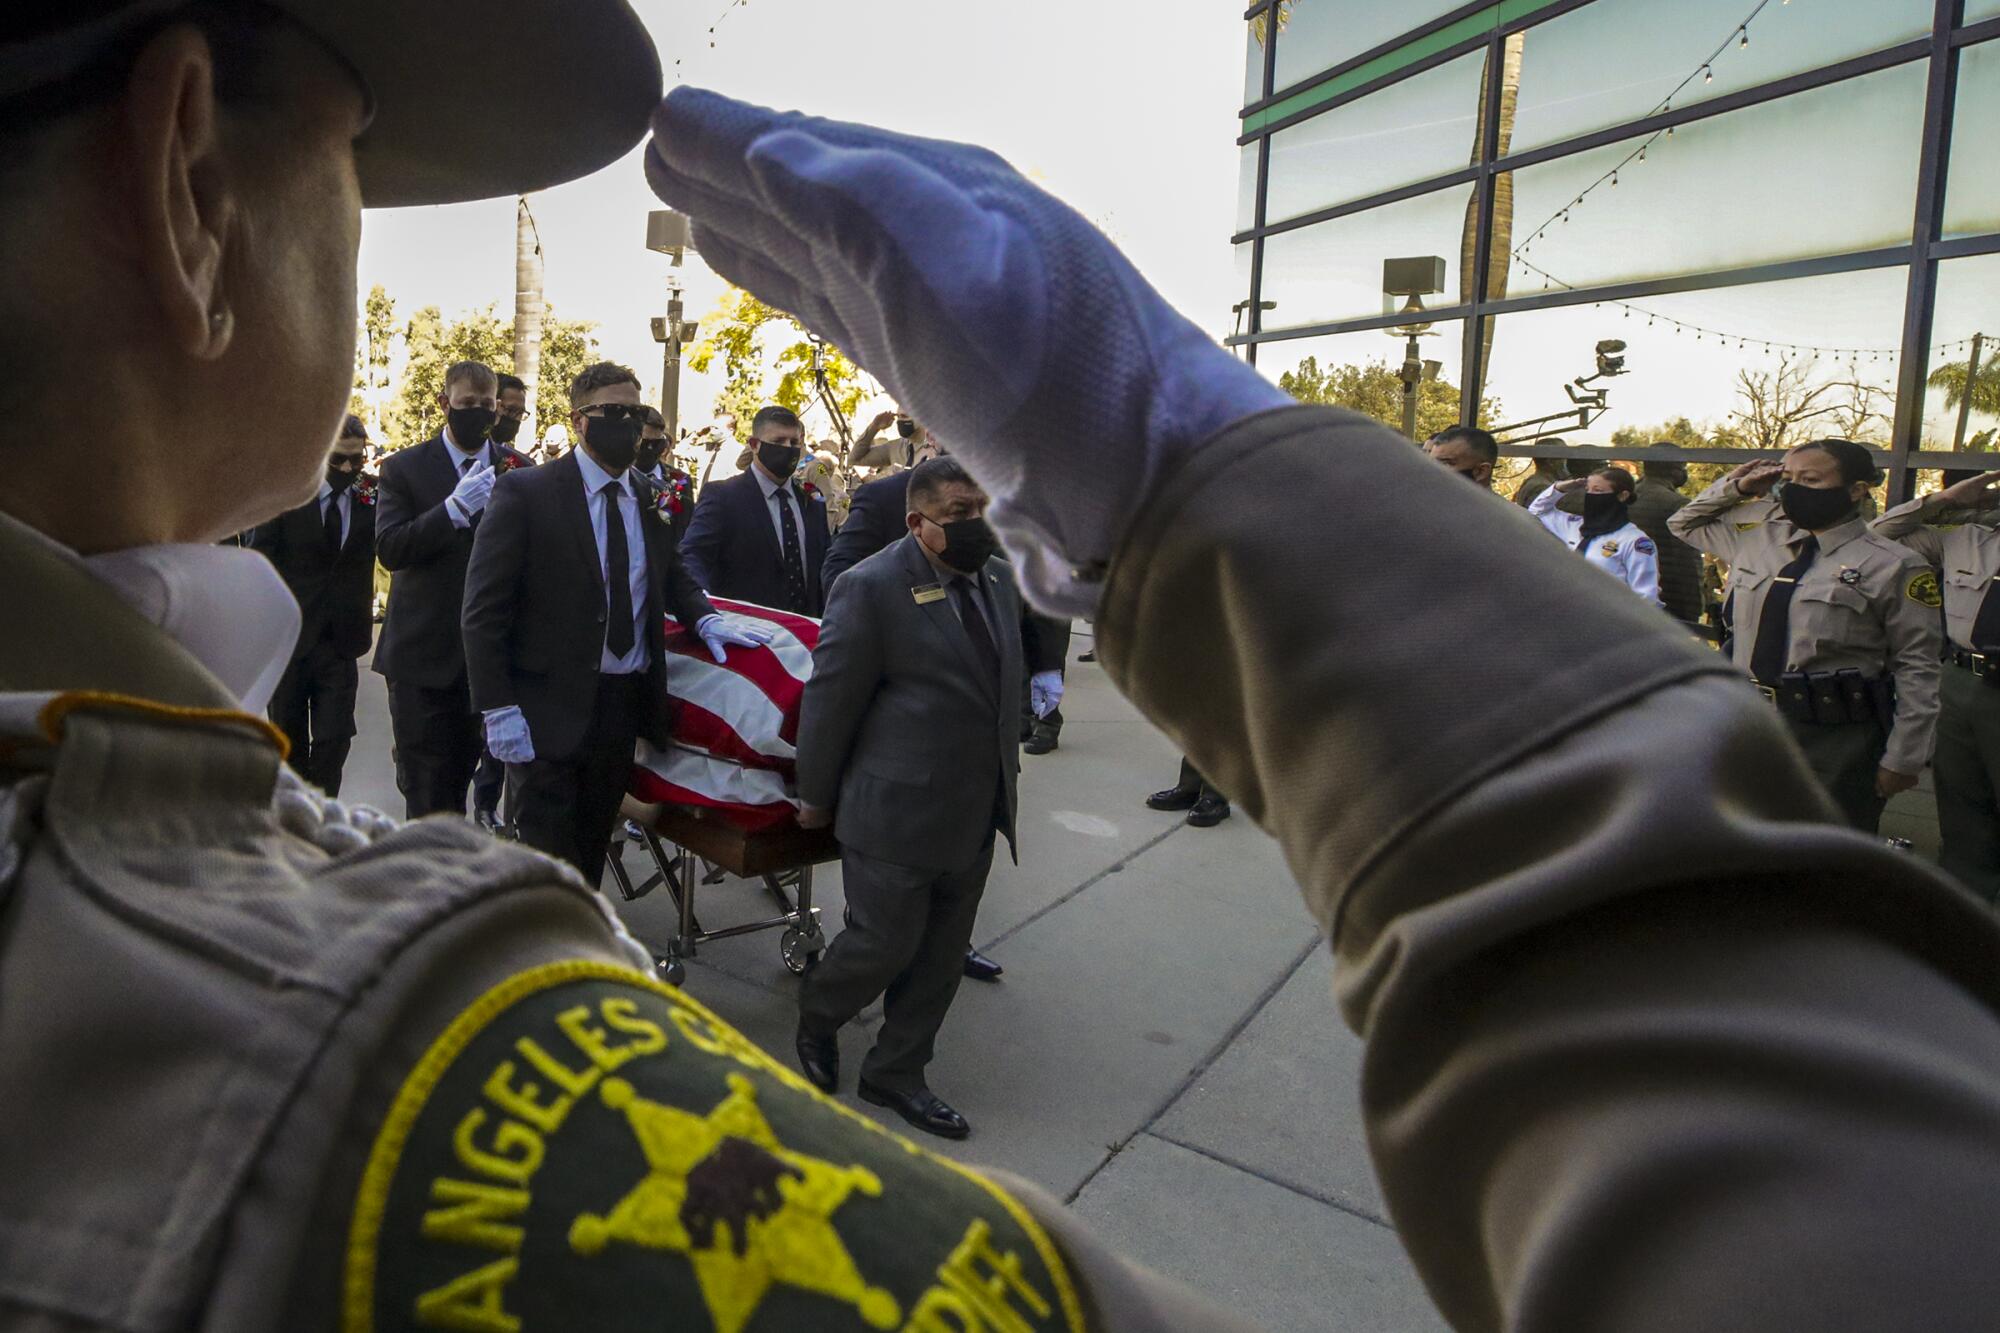 Pallbearers carrying casket of Deputy Thomas Albanese of the Los Angeles County Sheriff's Department